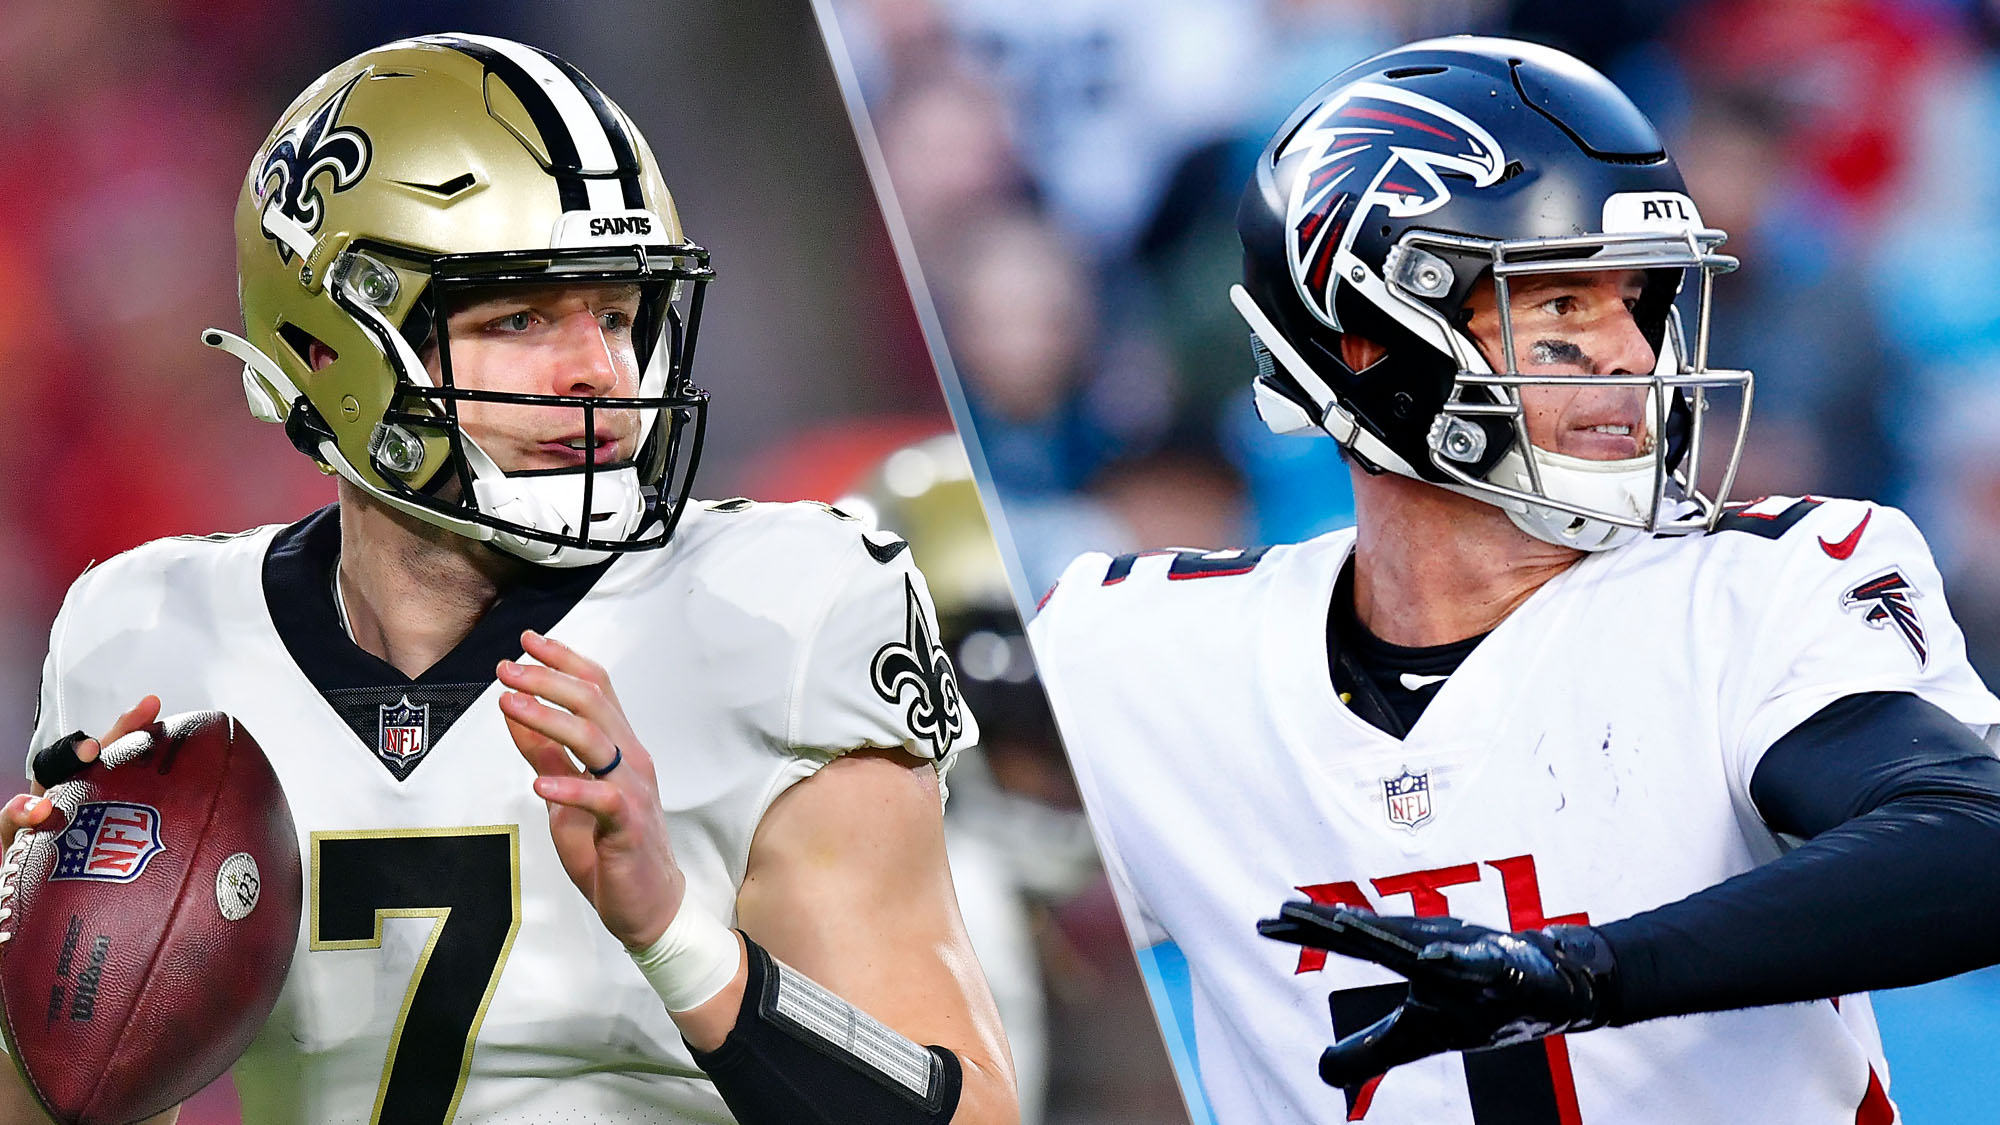 Saints vs Falcons live stream: How to watch NFL week 18 online | Tom's Guide